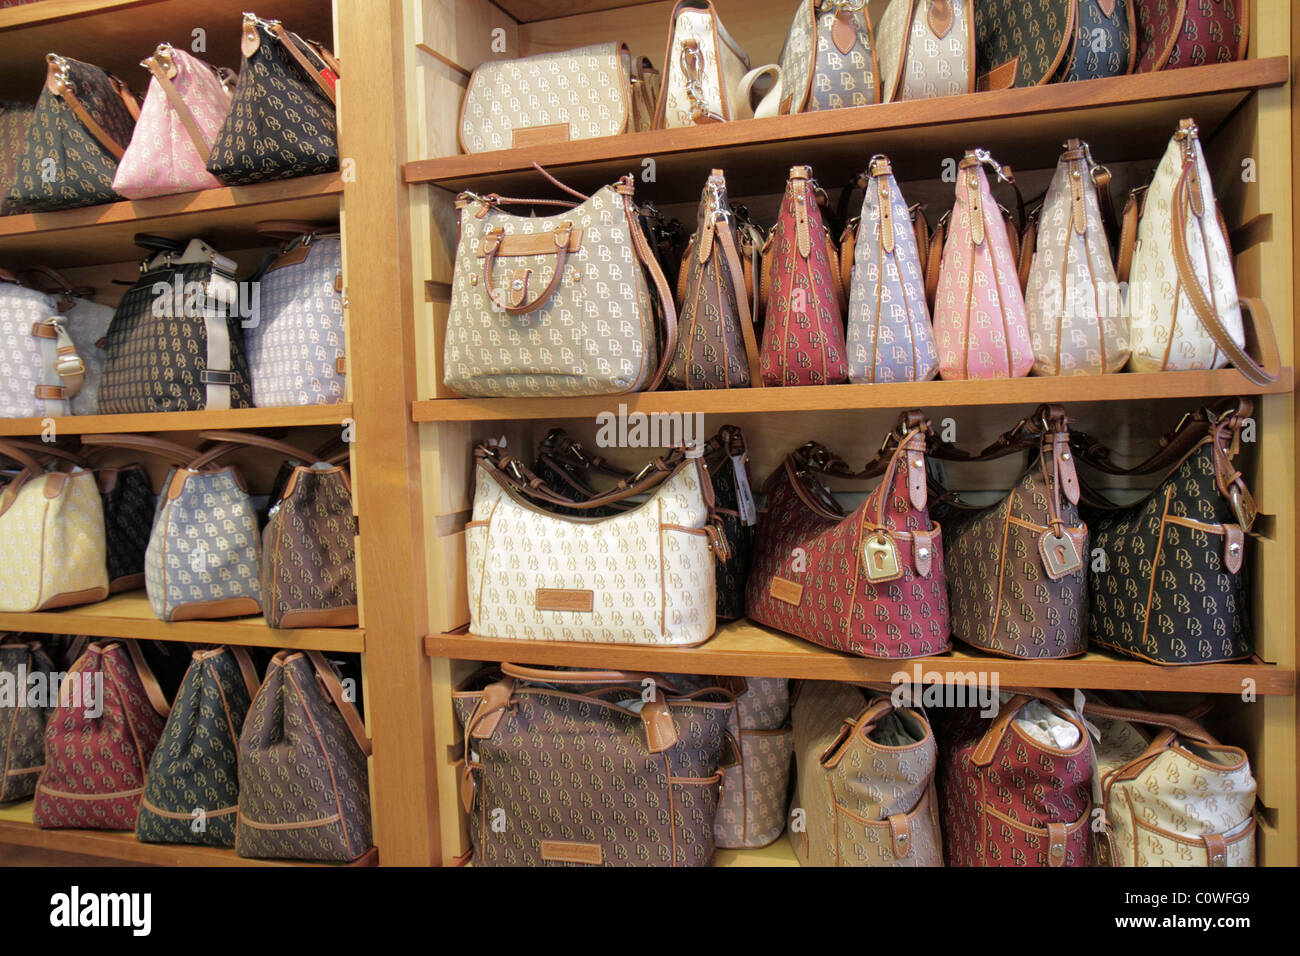 Maine,Northeast,New England,Freeport,outlet factory stores,Dooney & and  Bourke,woman's,men's handbag purse pocketbooks,leather goods,retail  products,d Stock Photo - Alamy